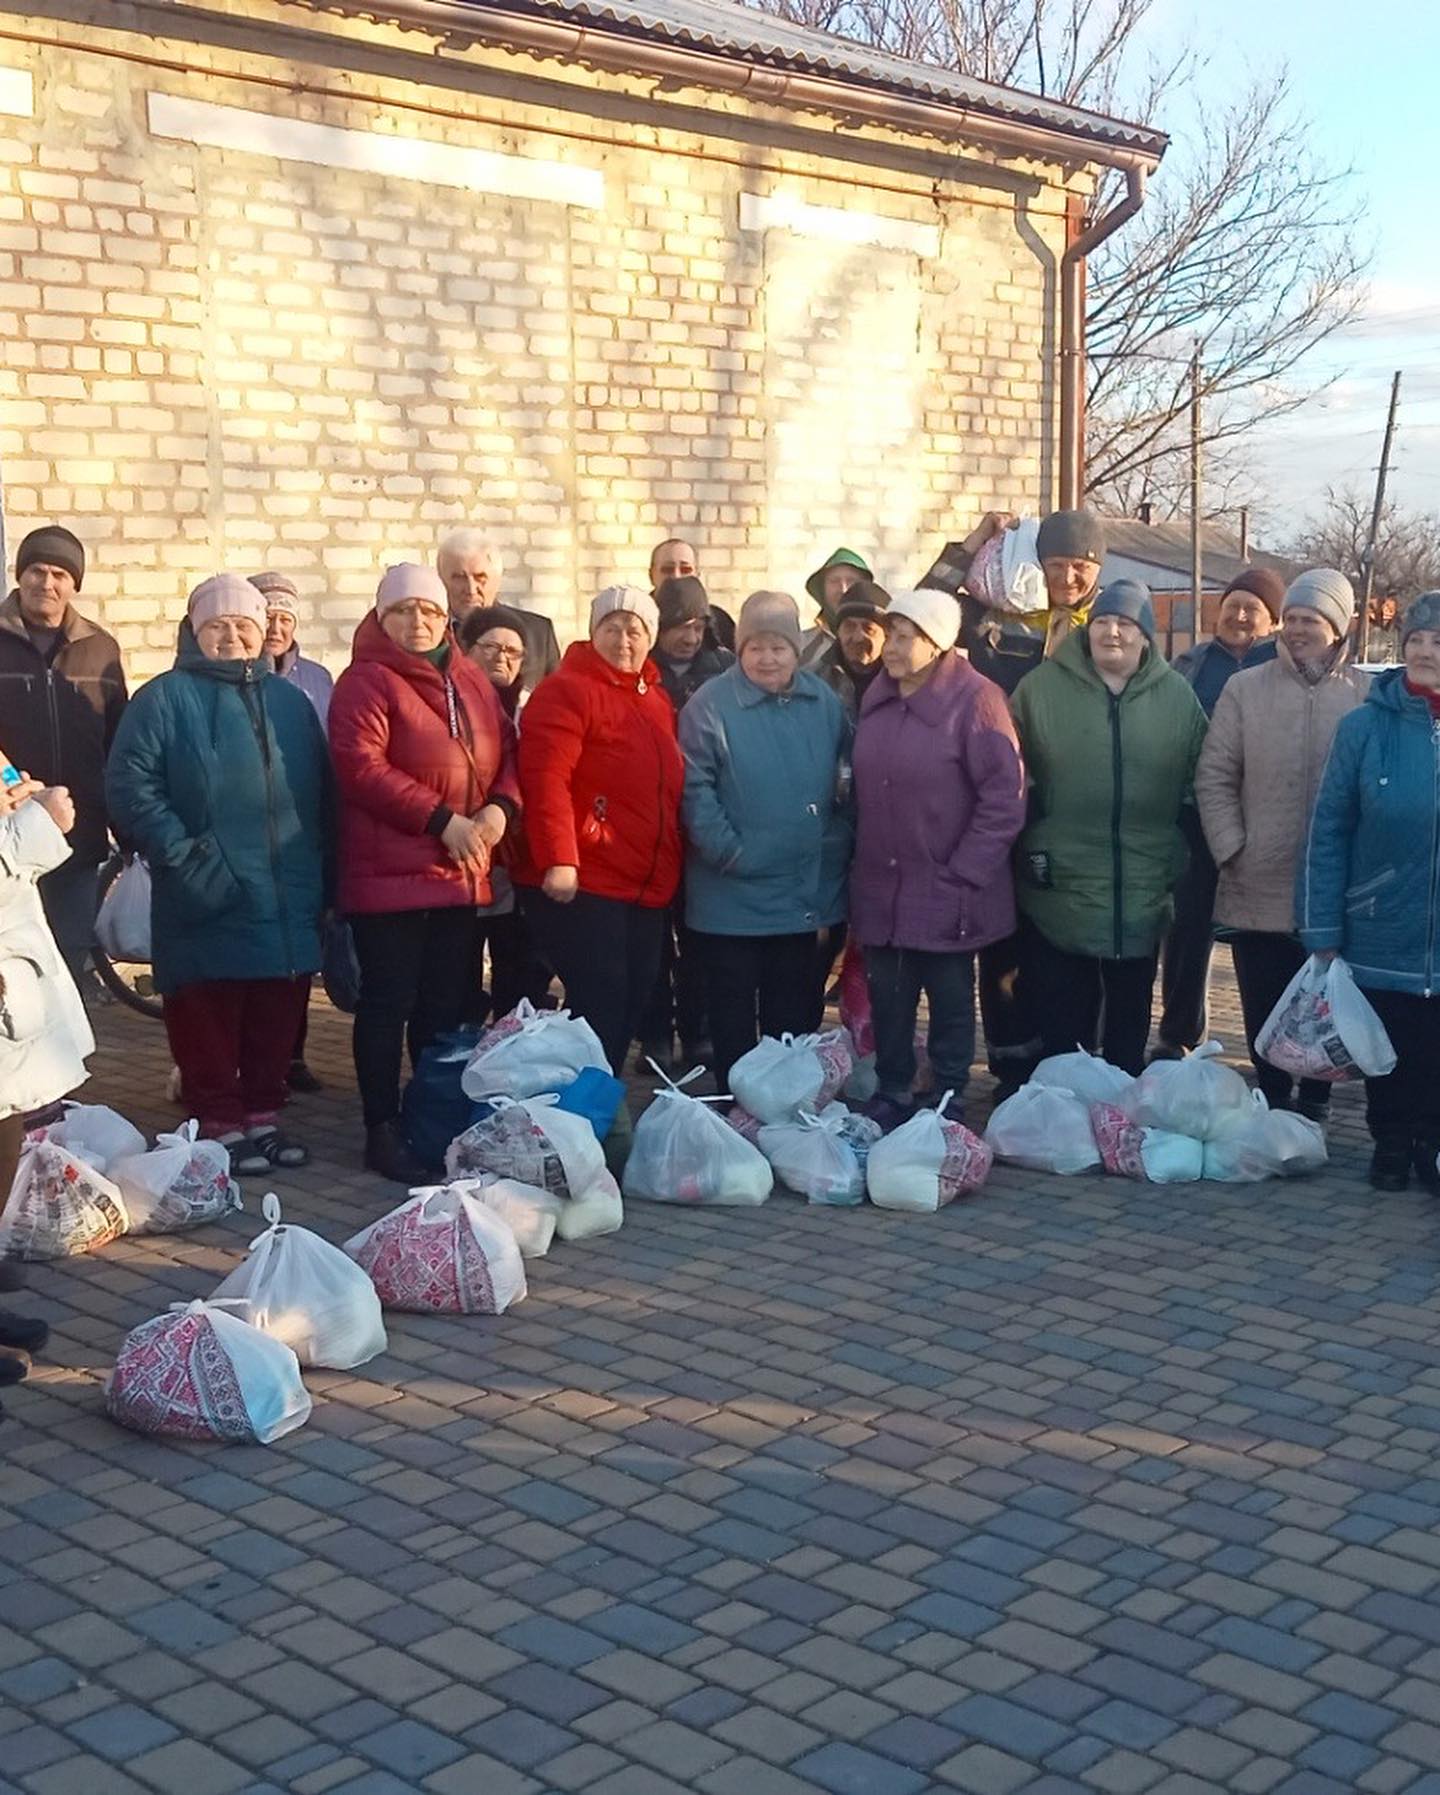 Group of elderly people standing outdoors in winter clothing with bags of groceries at their feet.